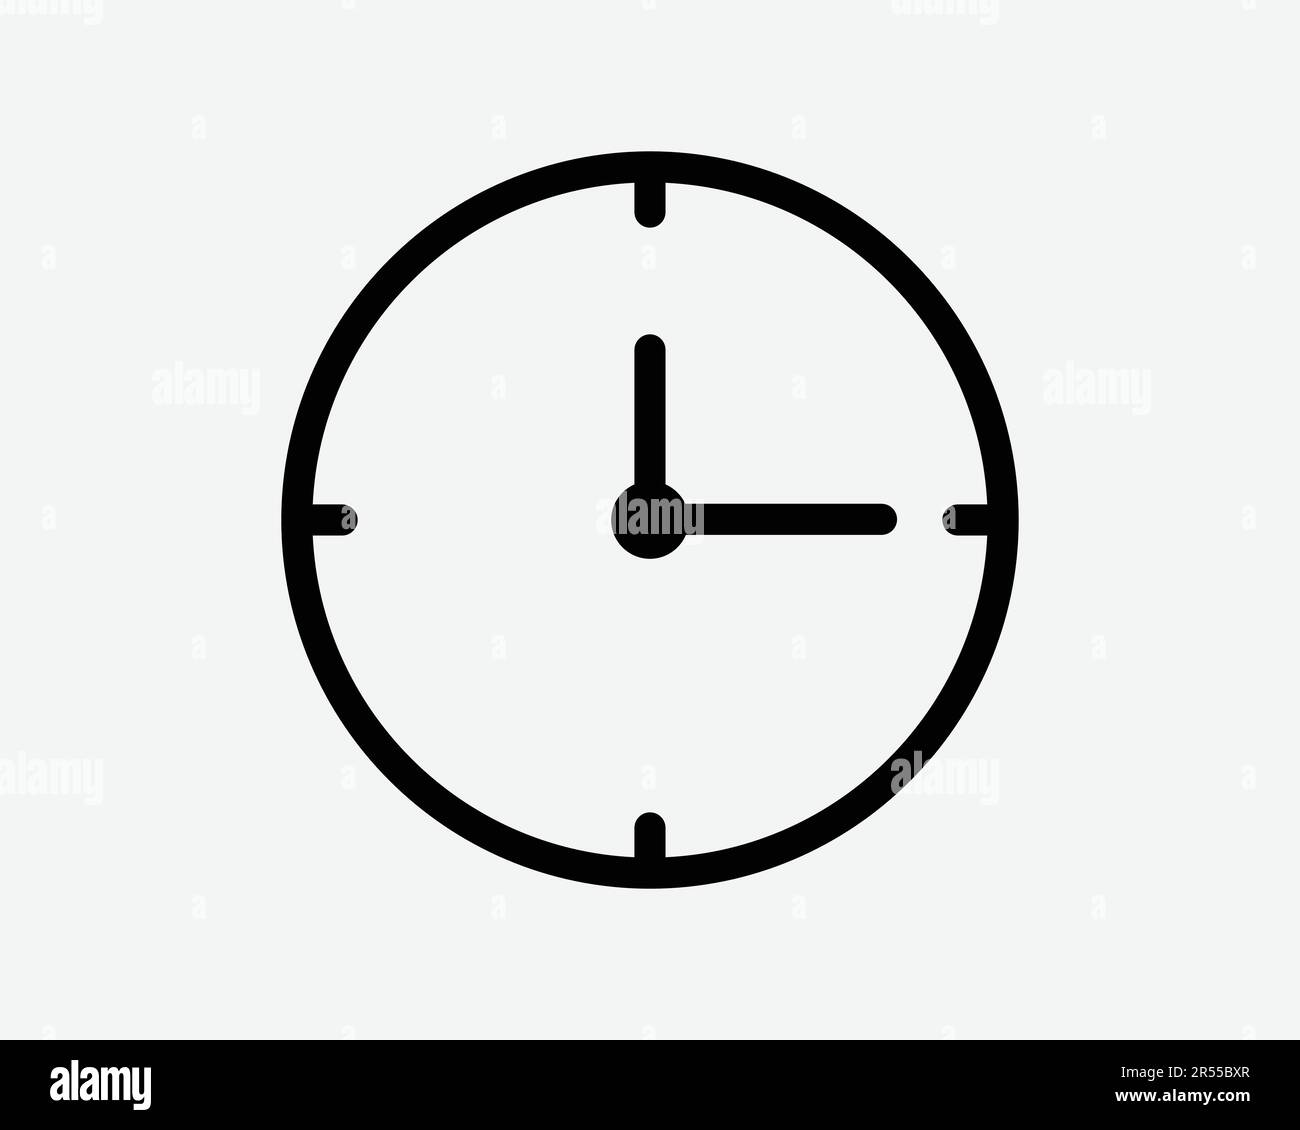 Alarm timer Stock Vector Images - Page 2 - Alamy